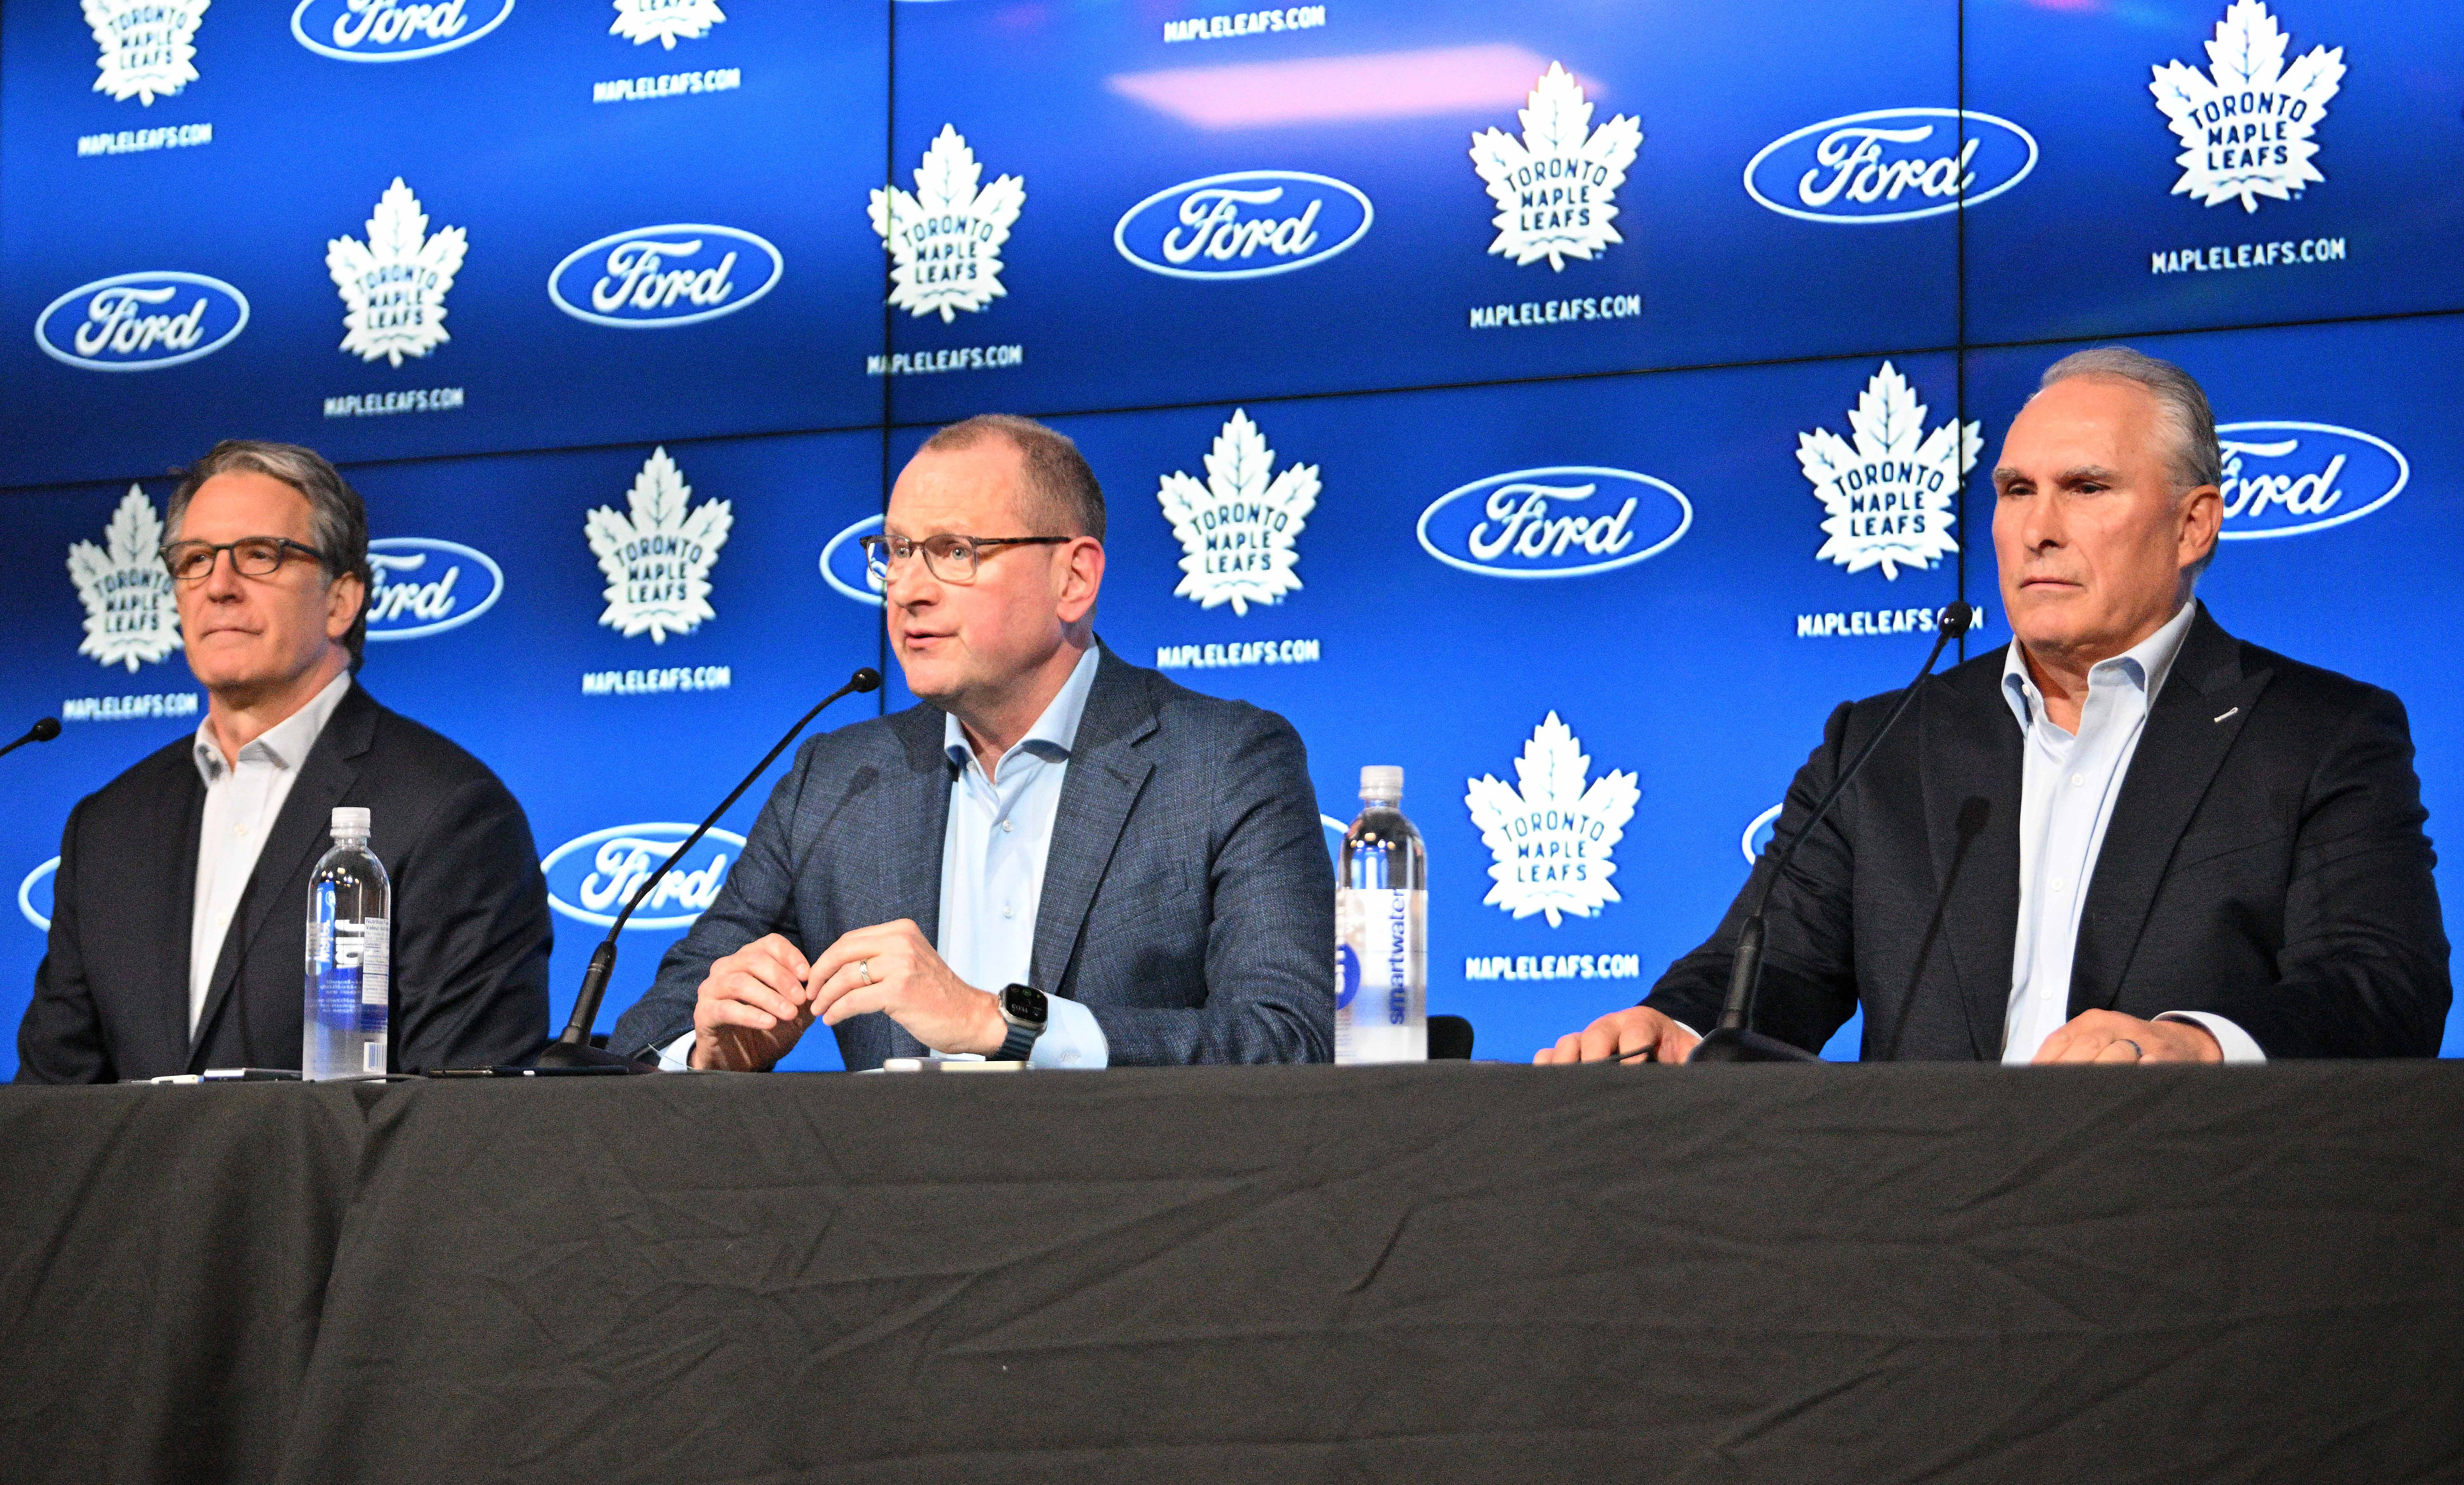 NHL: Toronto Maple Leafs - Press Conference